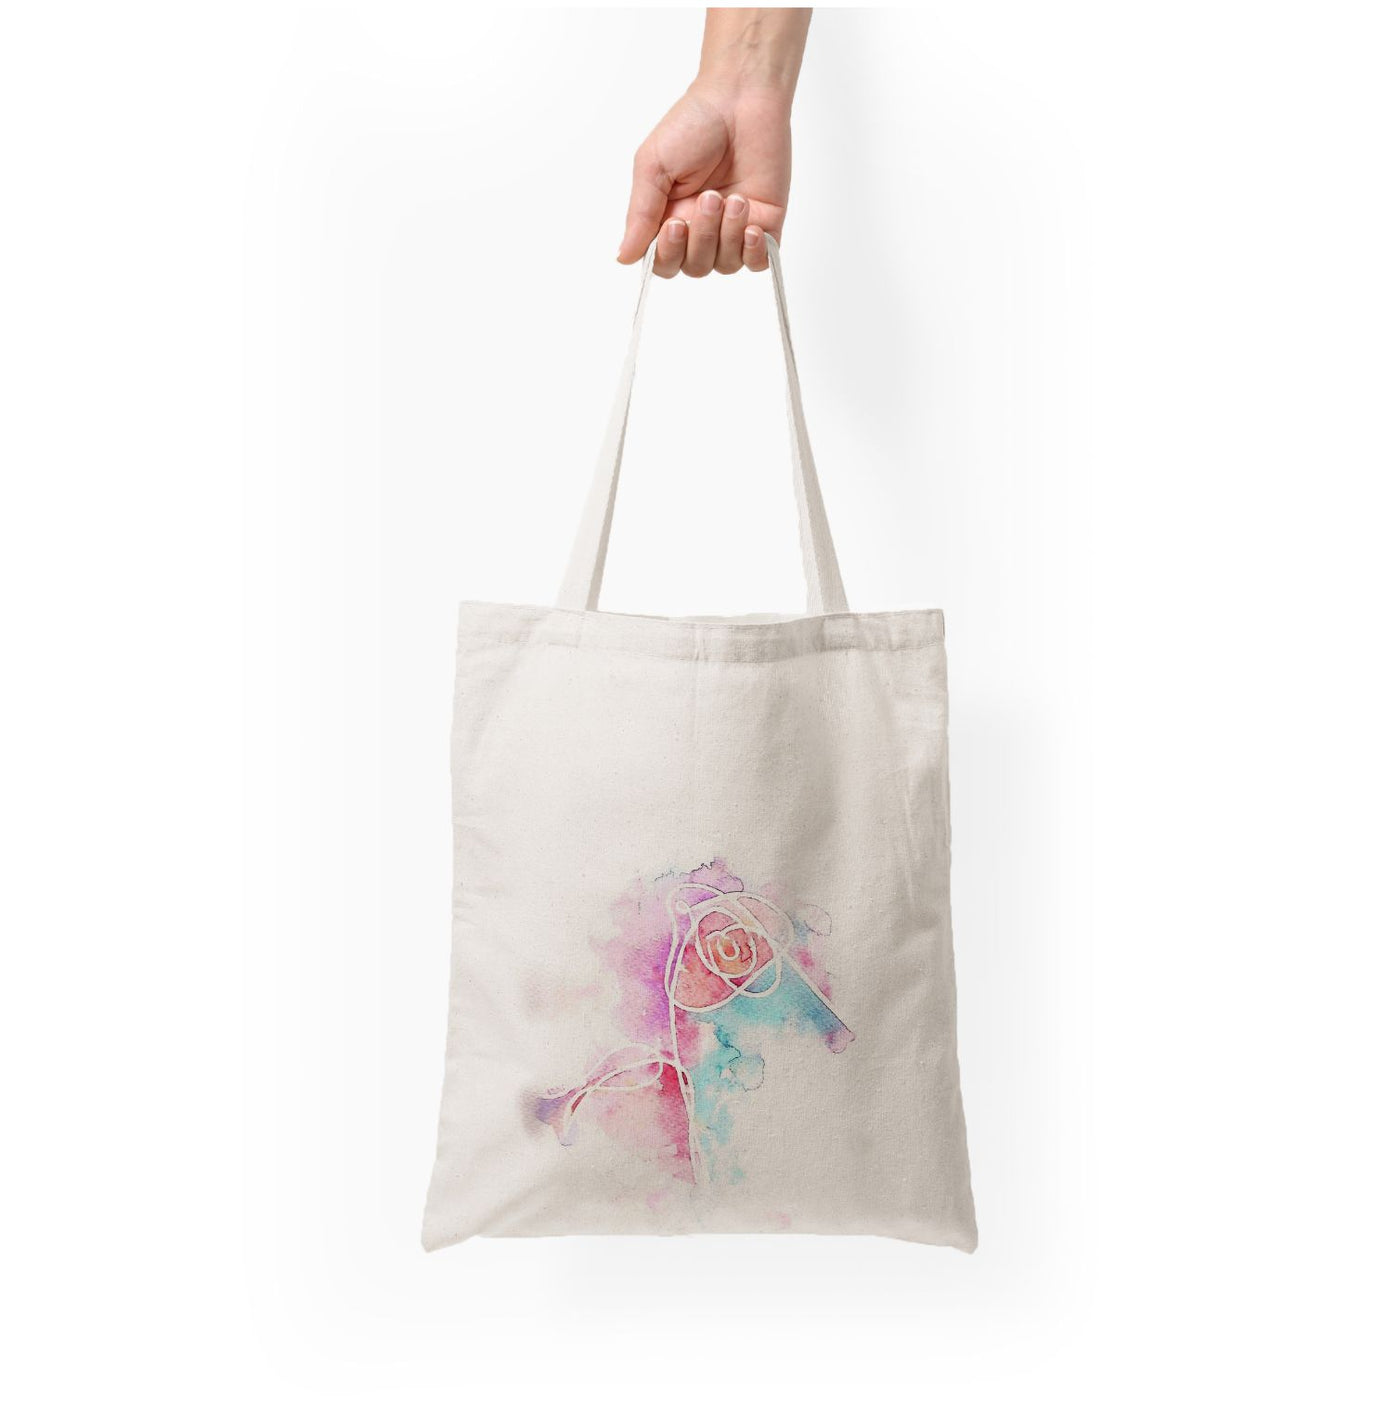 BTS Love Yourself Watercolour Painting Tote Bag